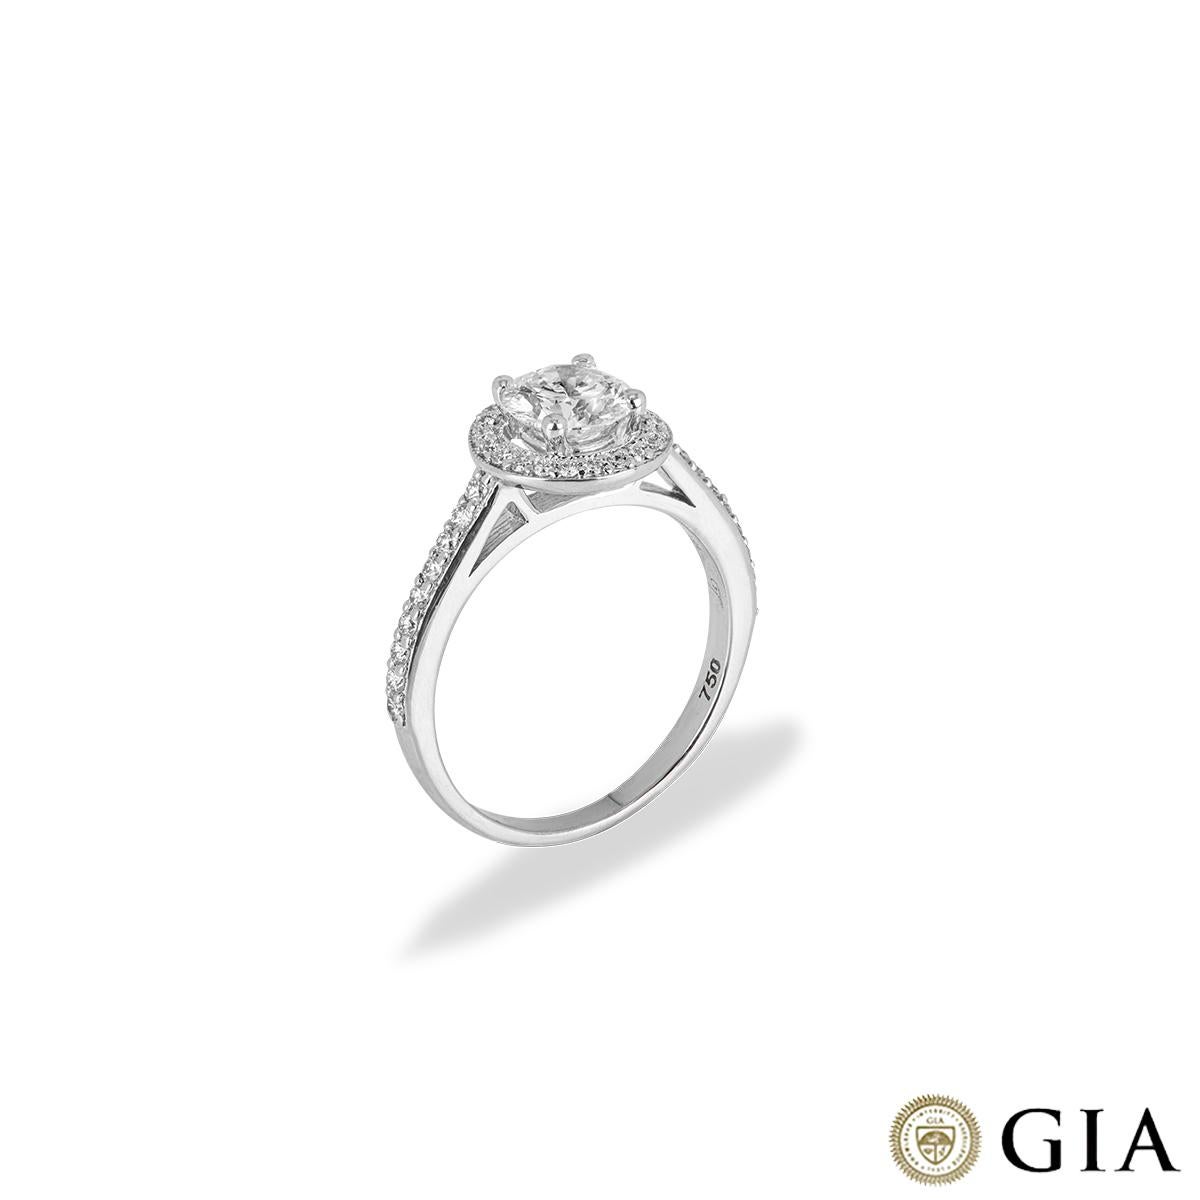 A beautiful 18k white gold diamond engagement ring. The central round brilliant cut diamond weighs 0.94ct, is F colour and VS2 in clarity with a halo of pave set round brilliant cut diamonds with a weight of 0.30ct, G-H colour and VS clarity. The